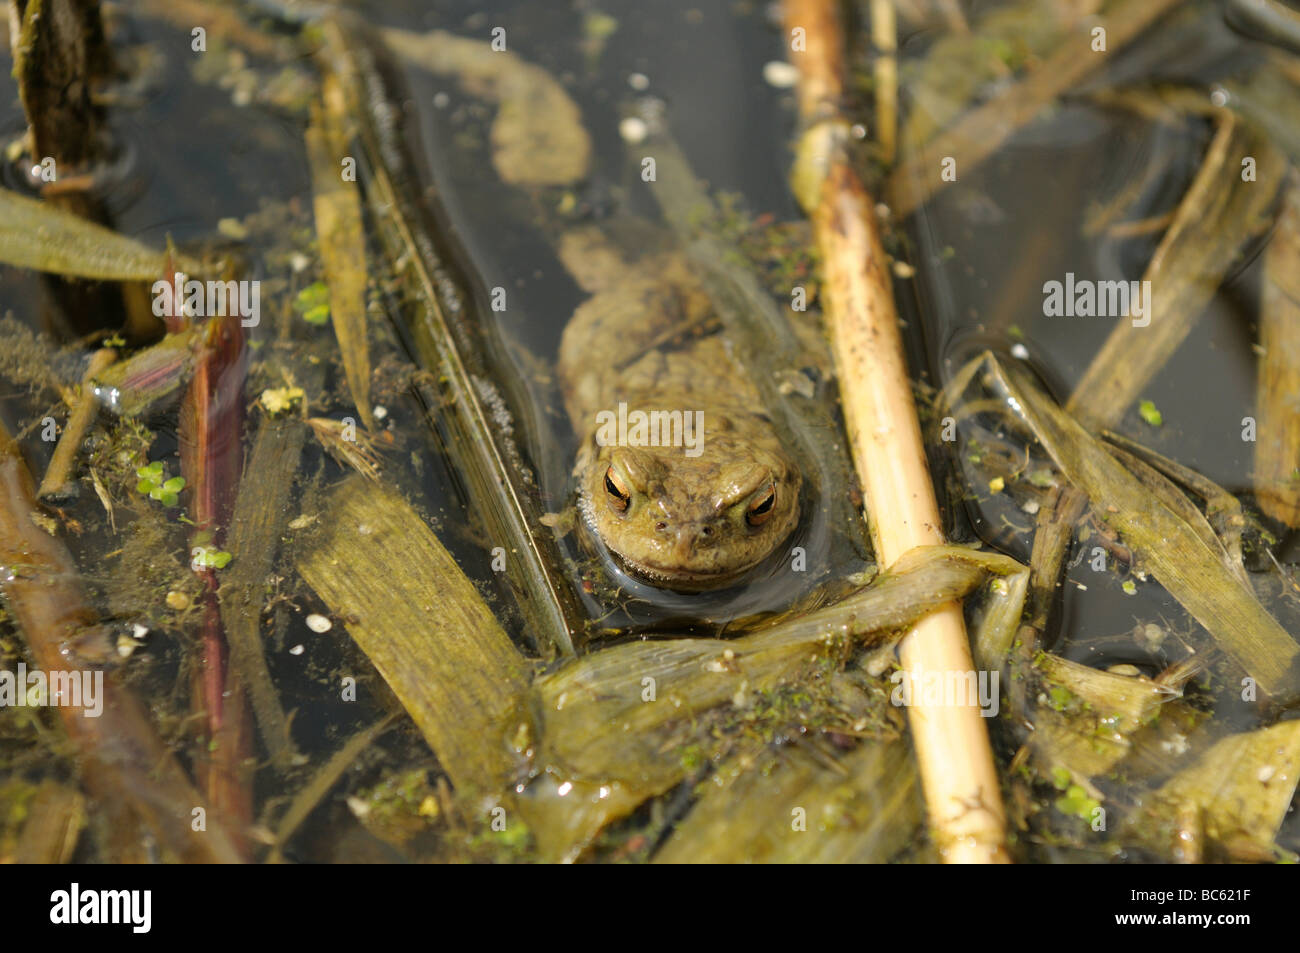 Close-up of African Common Toad (Amietophrynus gutturalis) in water, Altmuehlsee, Franconia, Bavaria, Germany Stock Photo